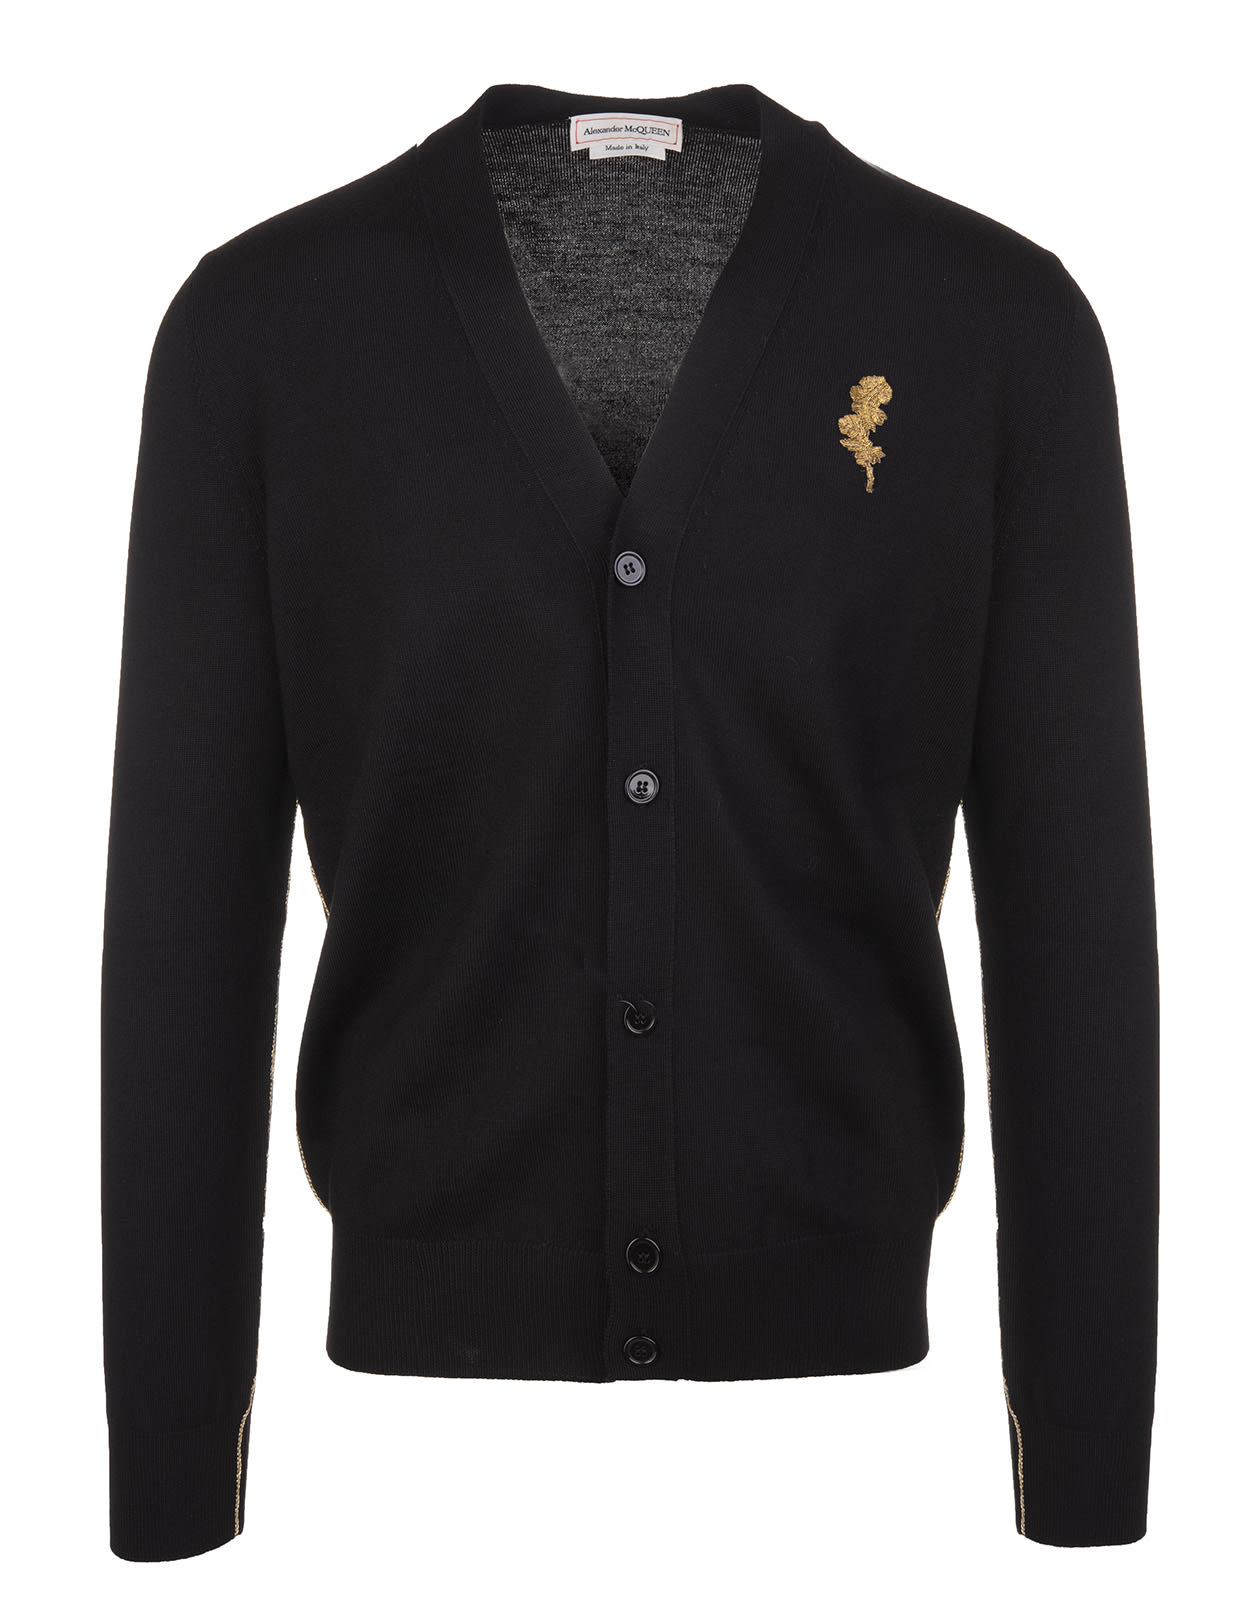 Alexander Mcqueen Man Black Cardigan With Gold Thistle Embroidery In Black/gold